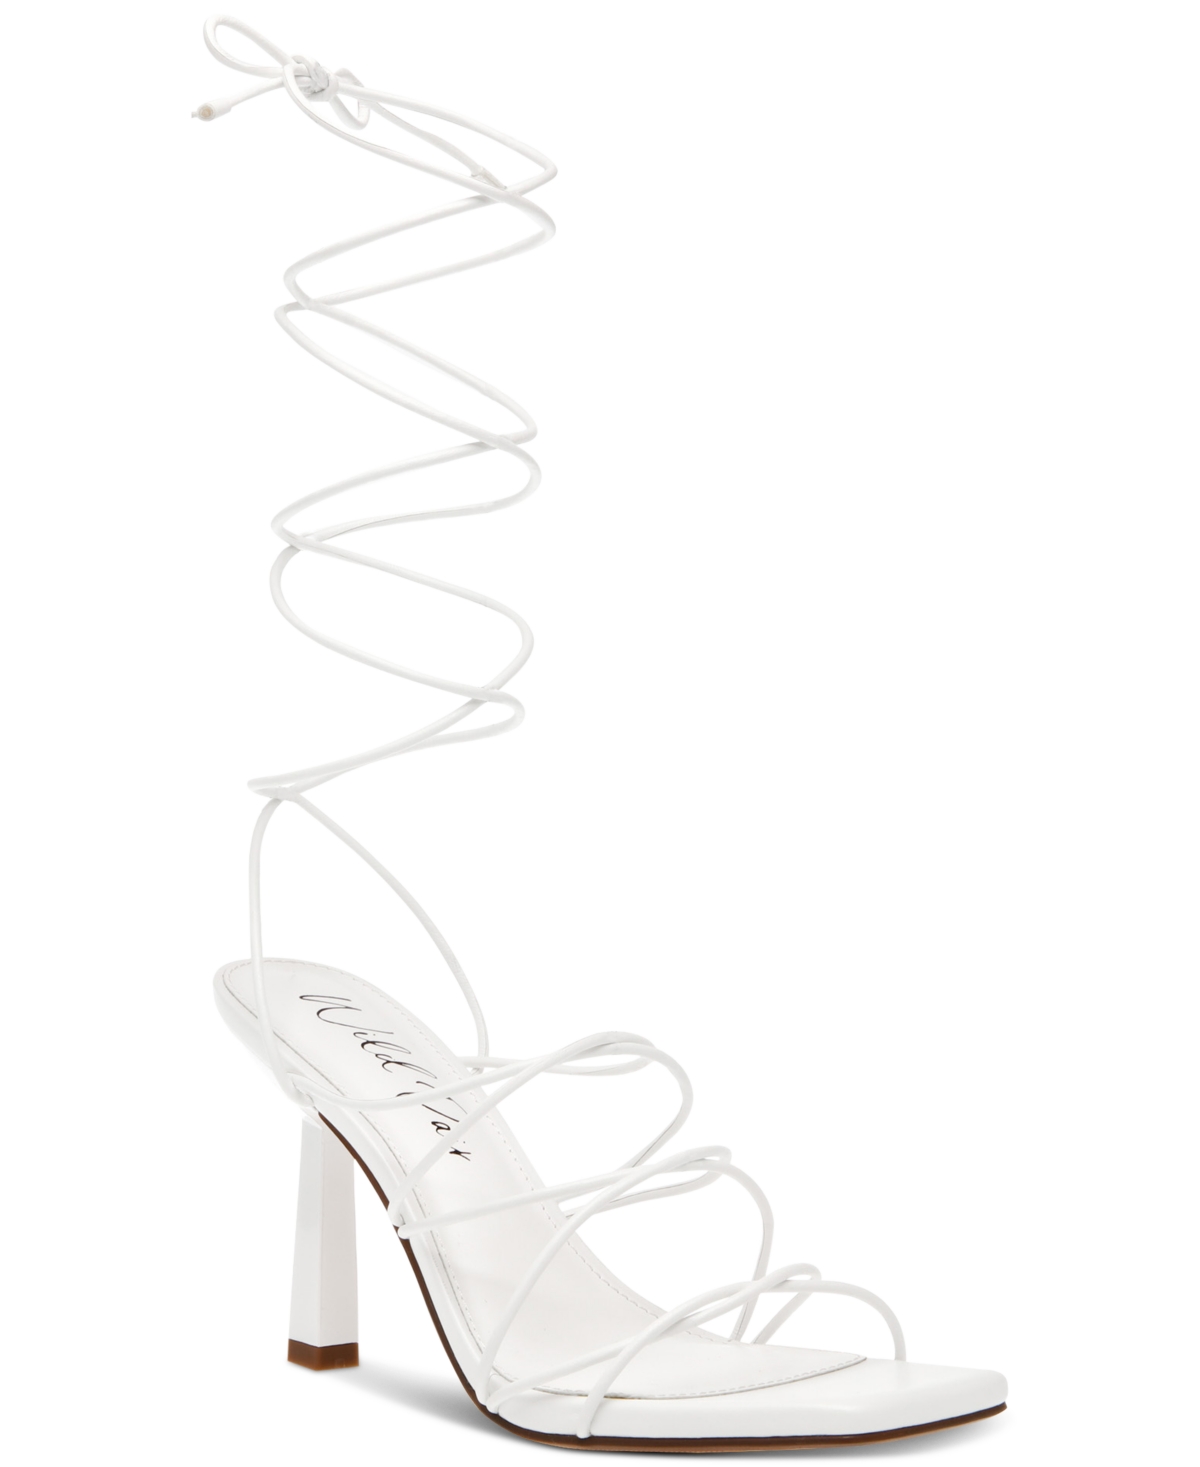 Eross Lace-Up Dress Sandals, Created for Macy's - Gold